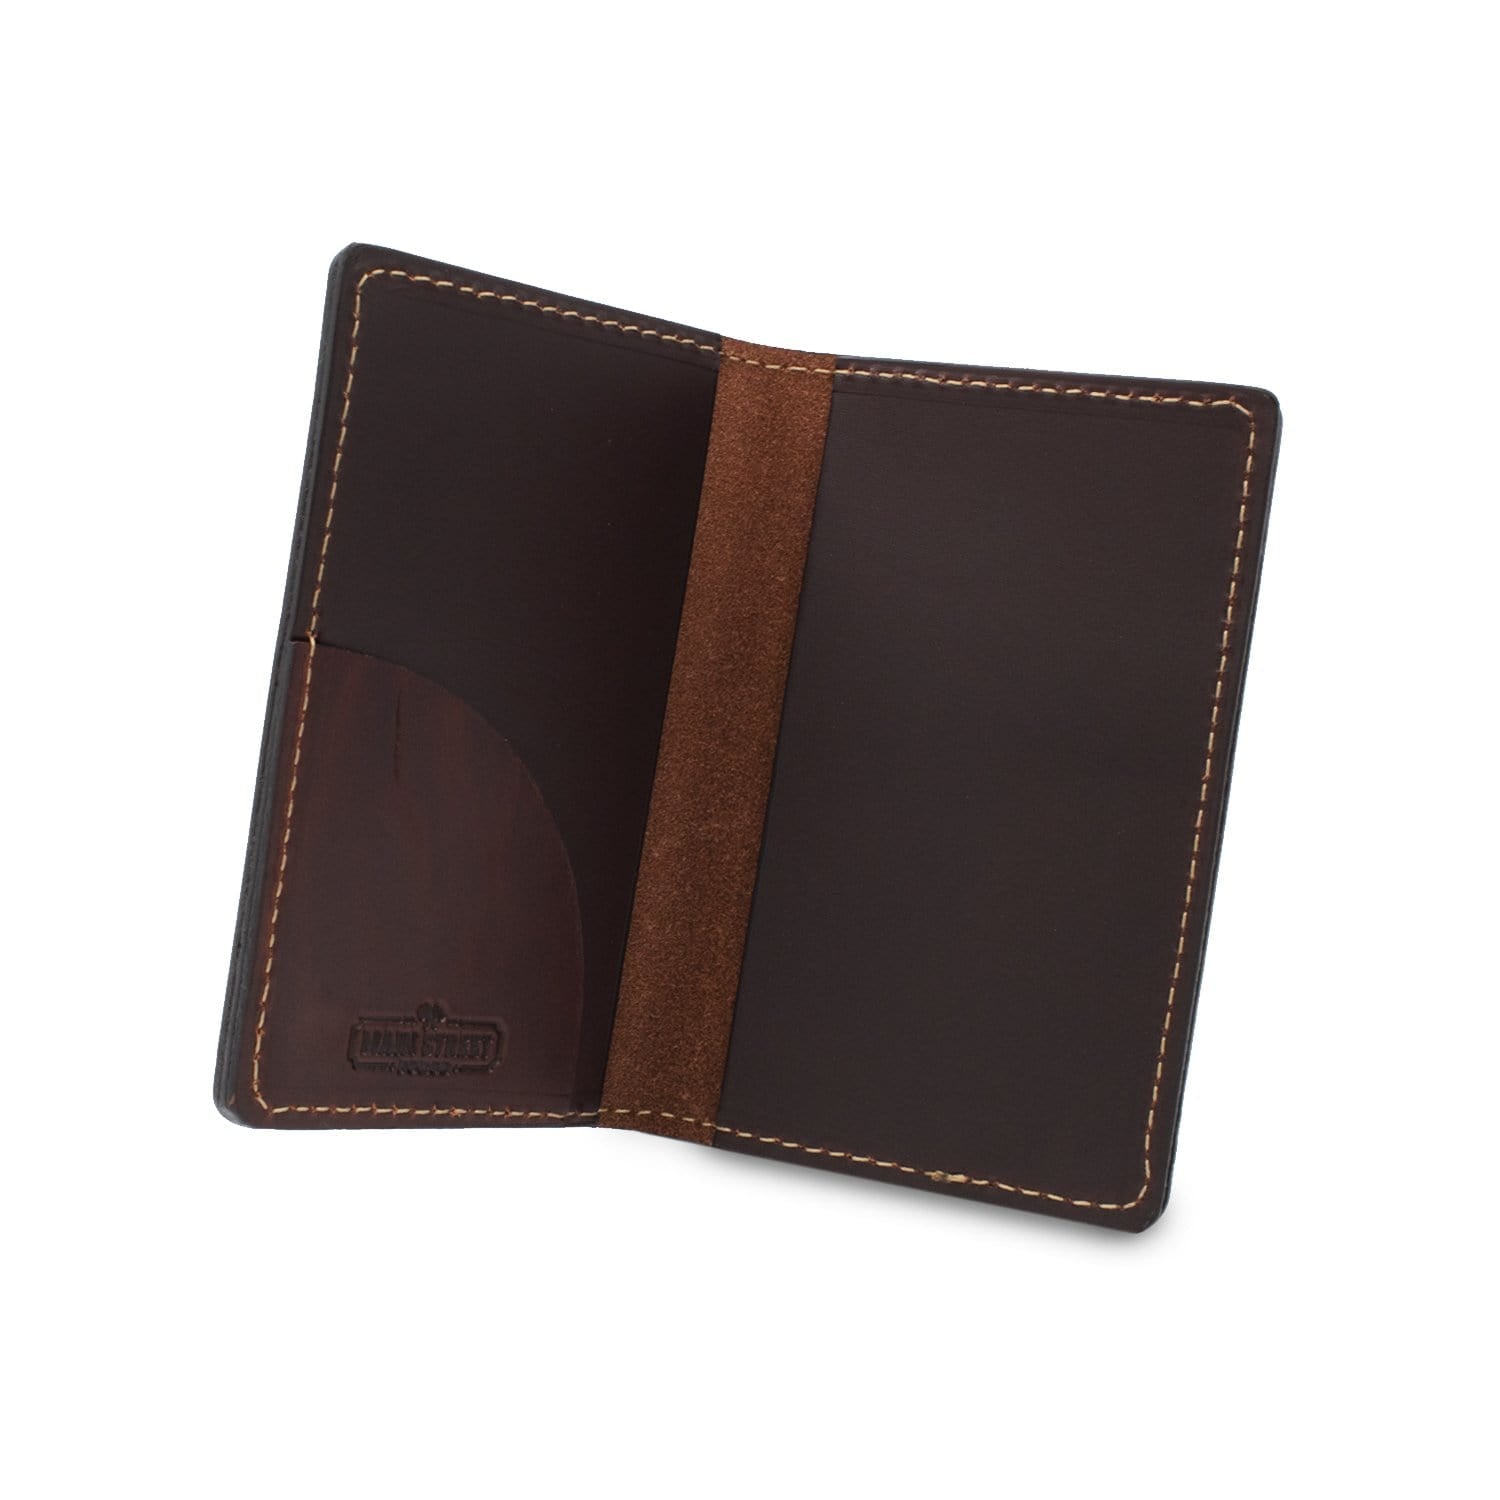 Main Street Forge Bifold Leather Wallet for Men | Made in USA | Mens Bifold Wallets | American Made | Tobacco Snakebite Brown